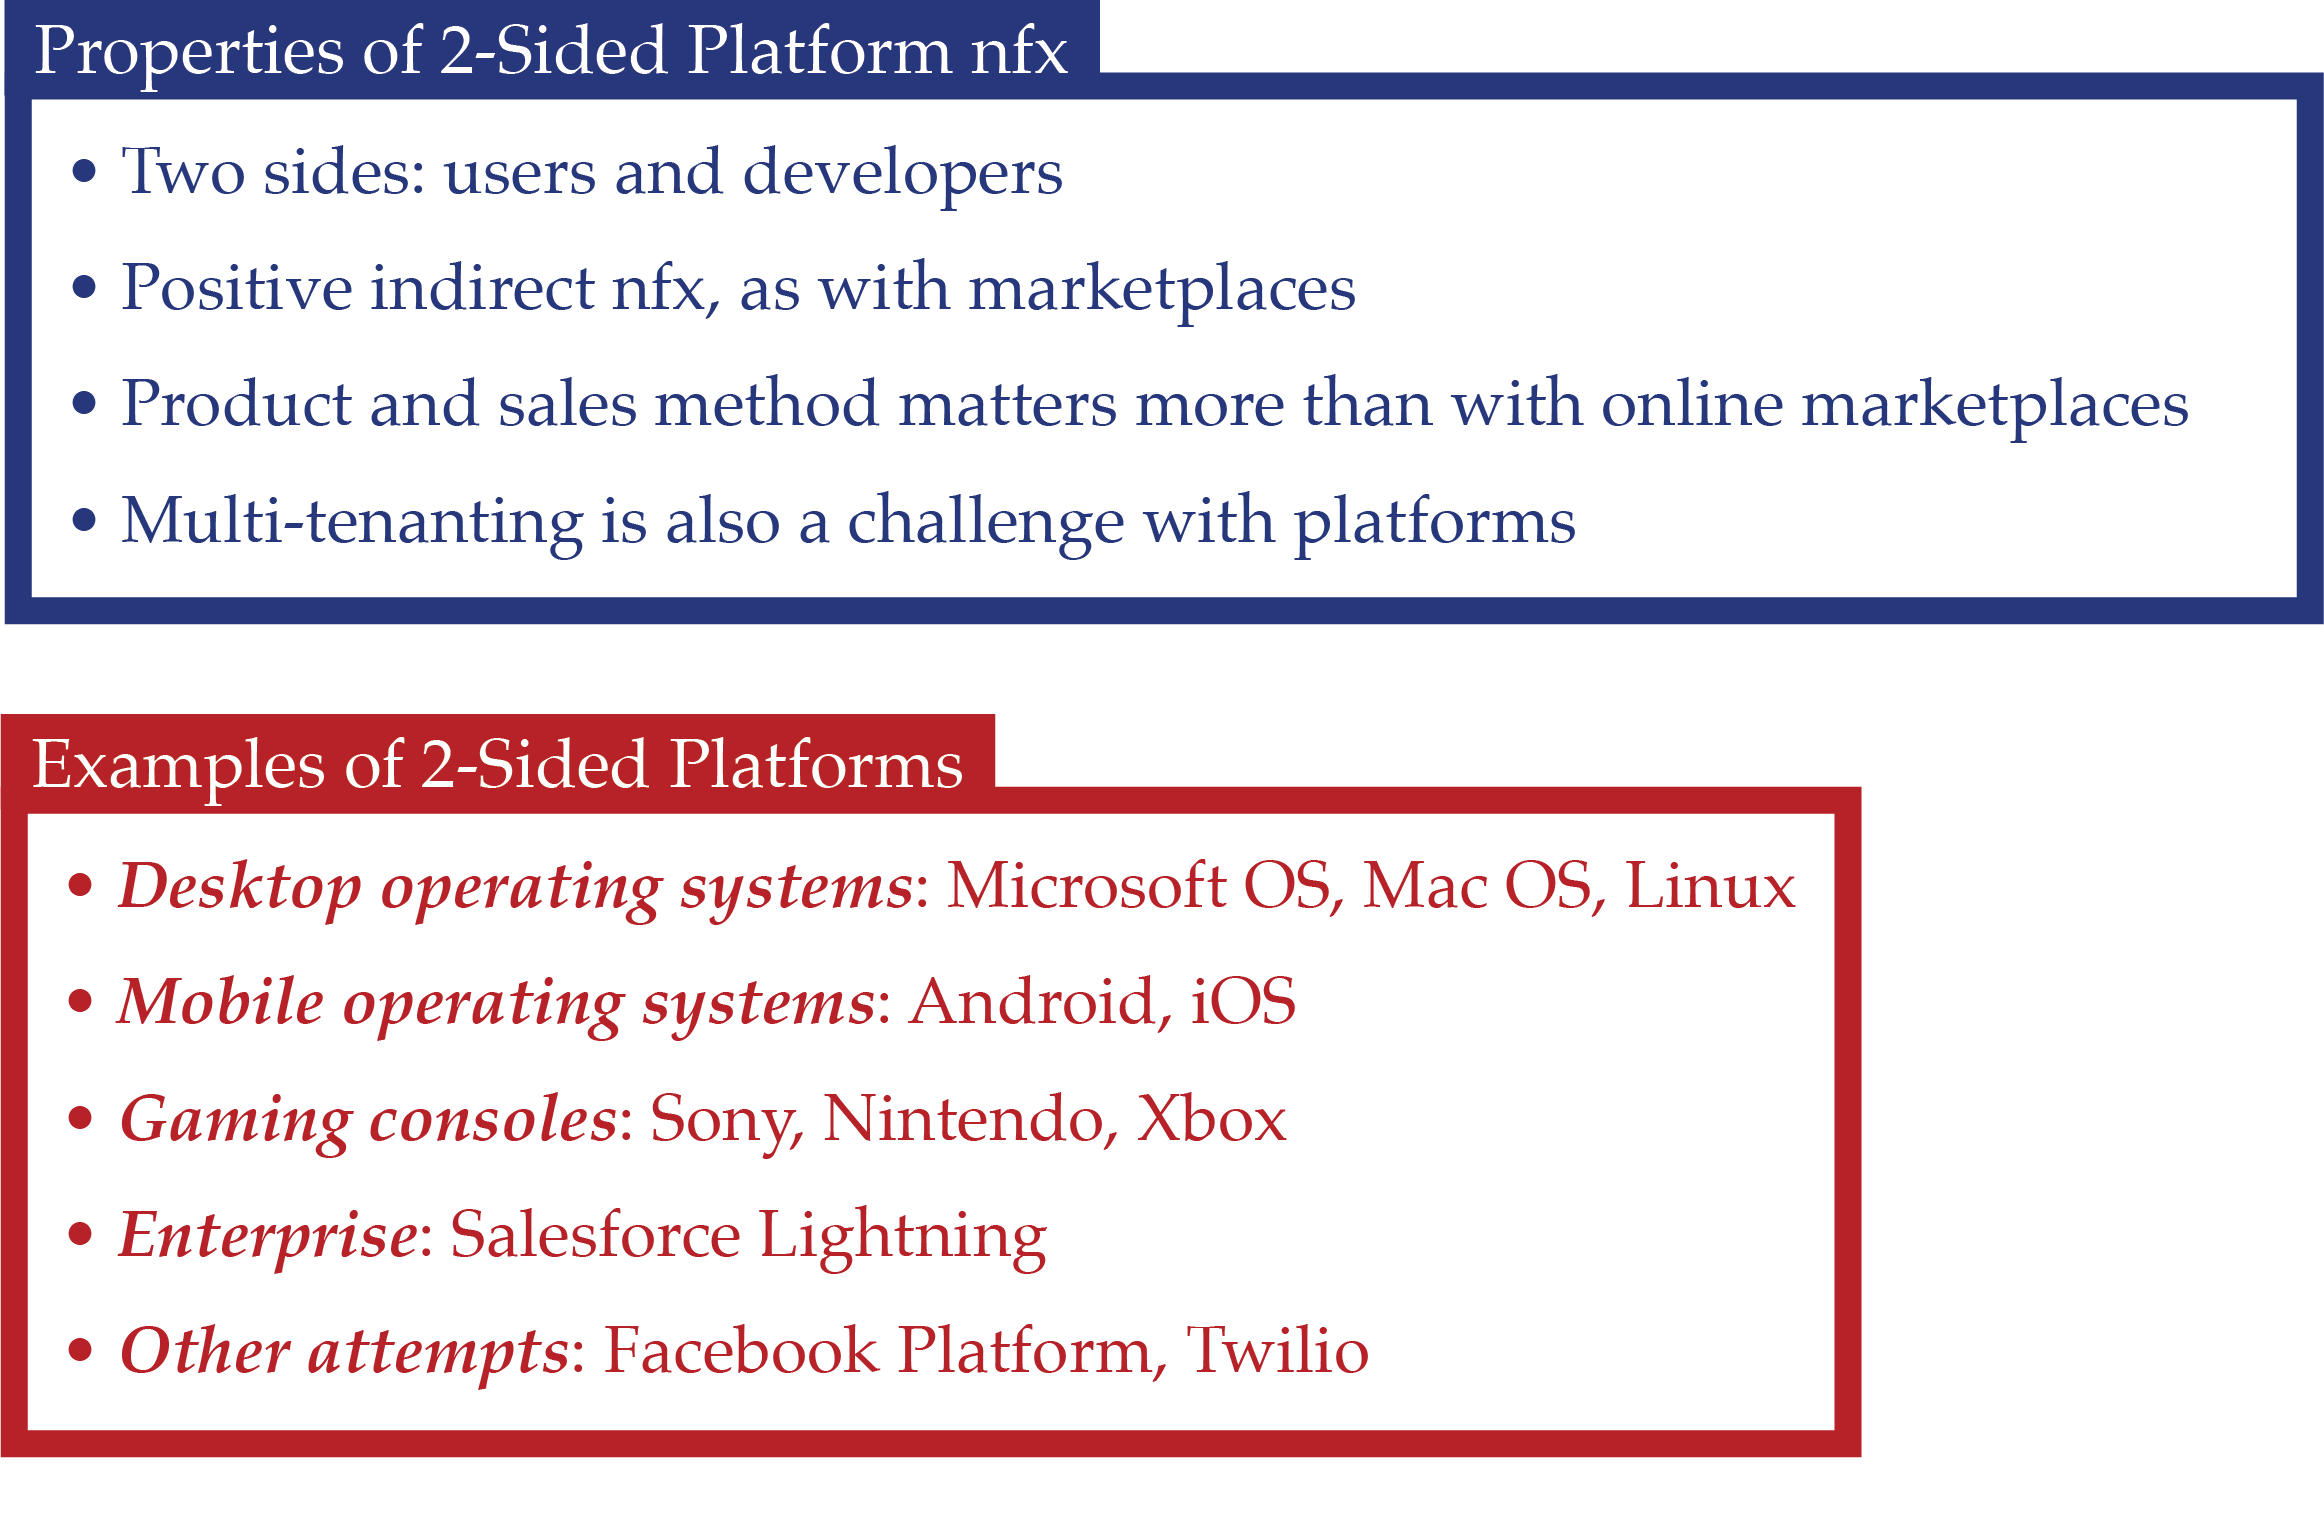 Properties and Example of 2-sided Platform